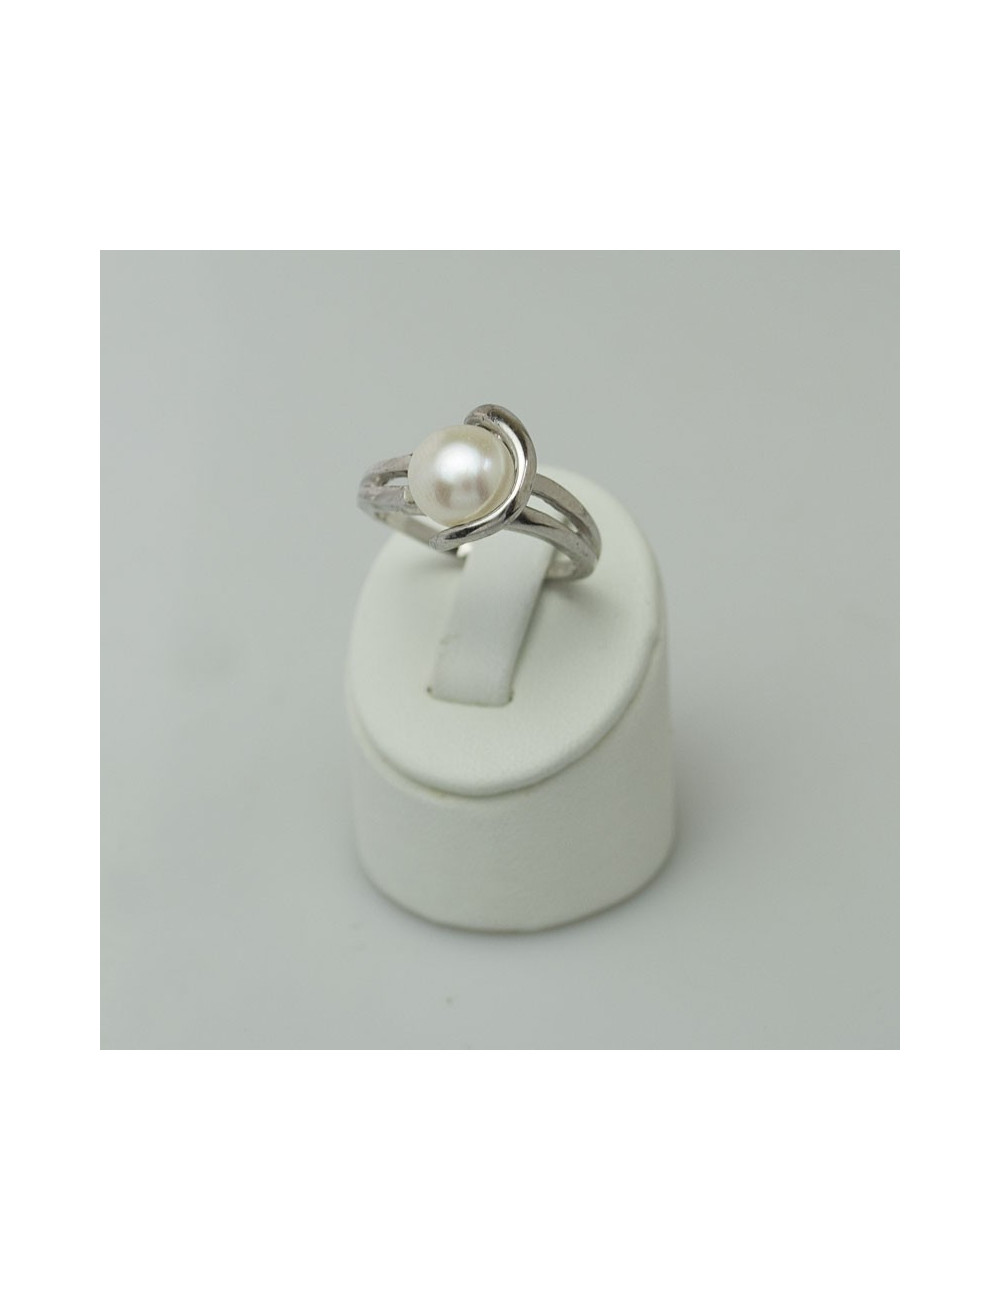 Silver ring with freshwater pearl SR0167S